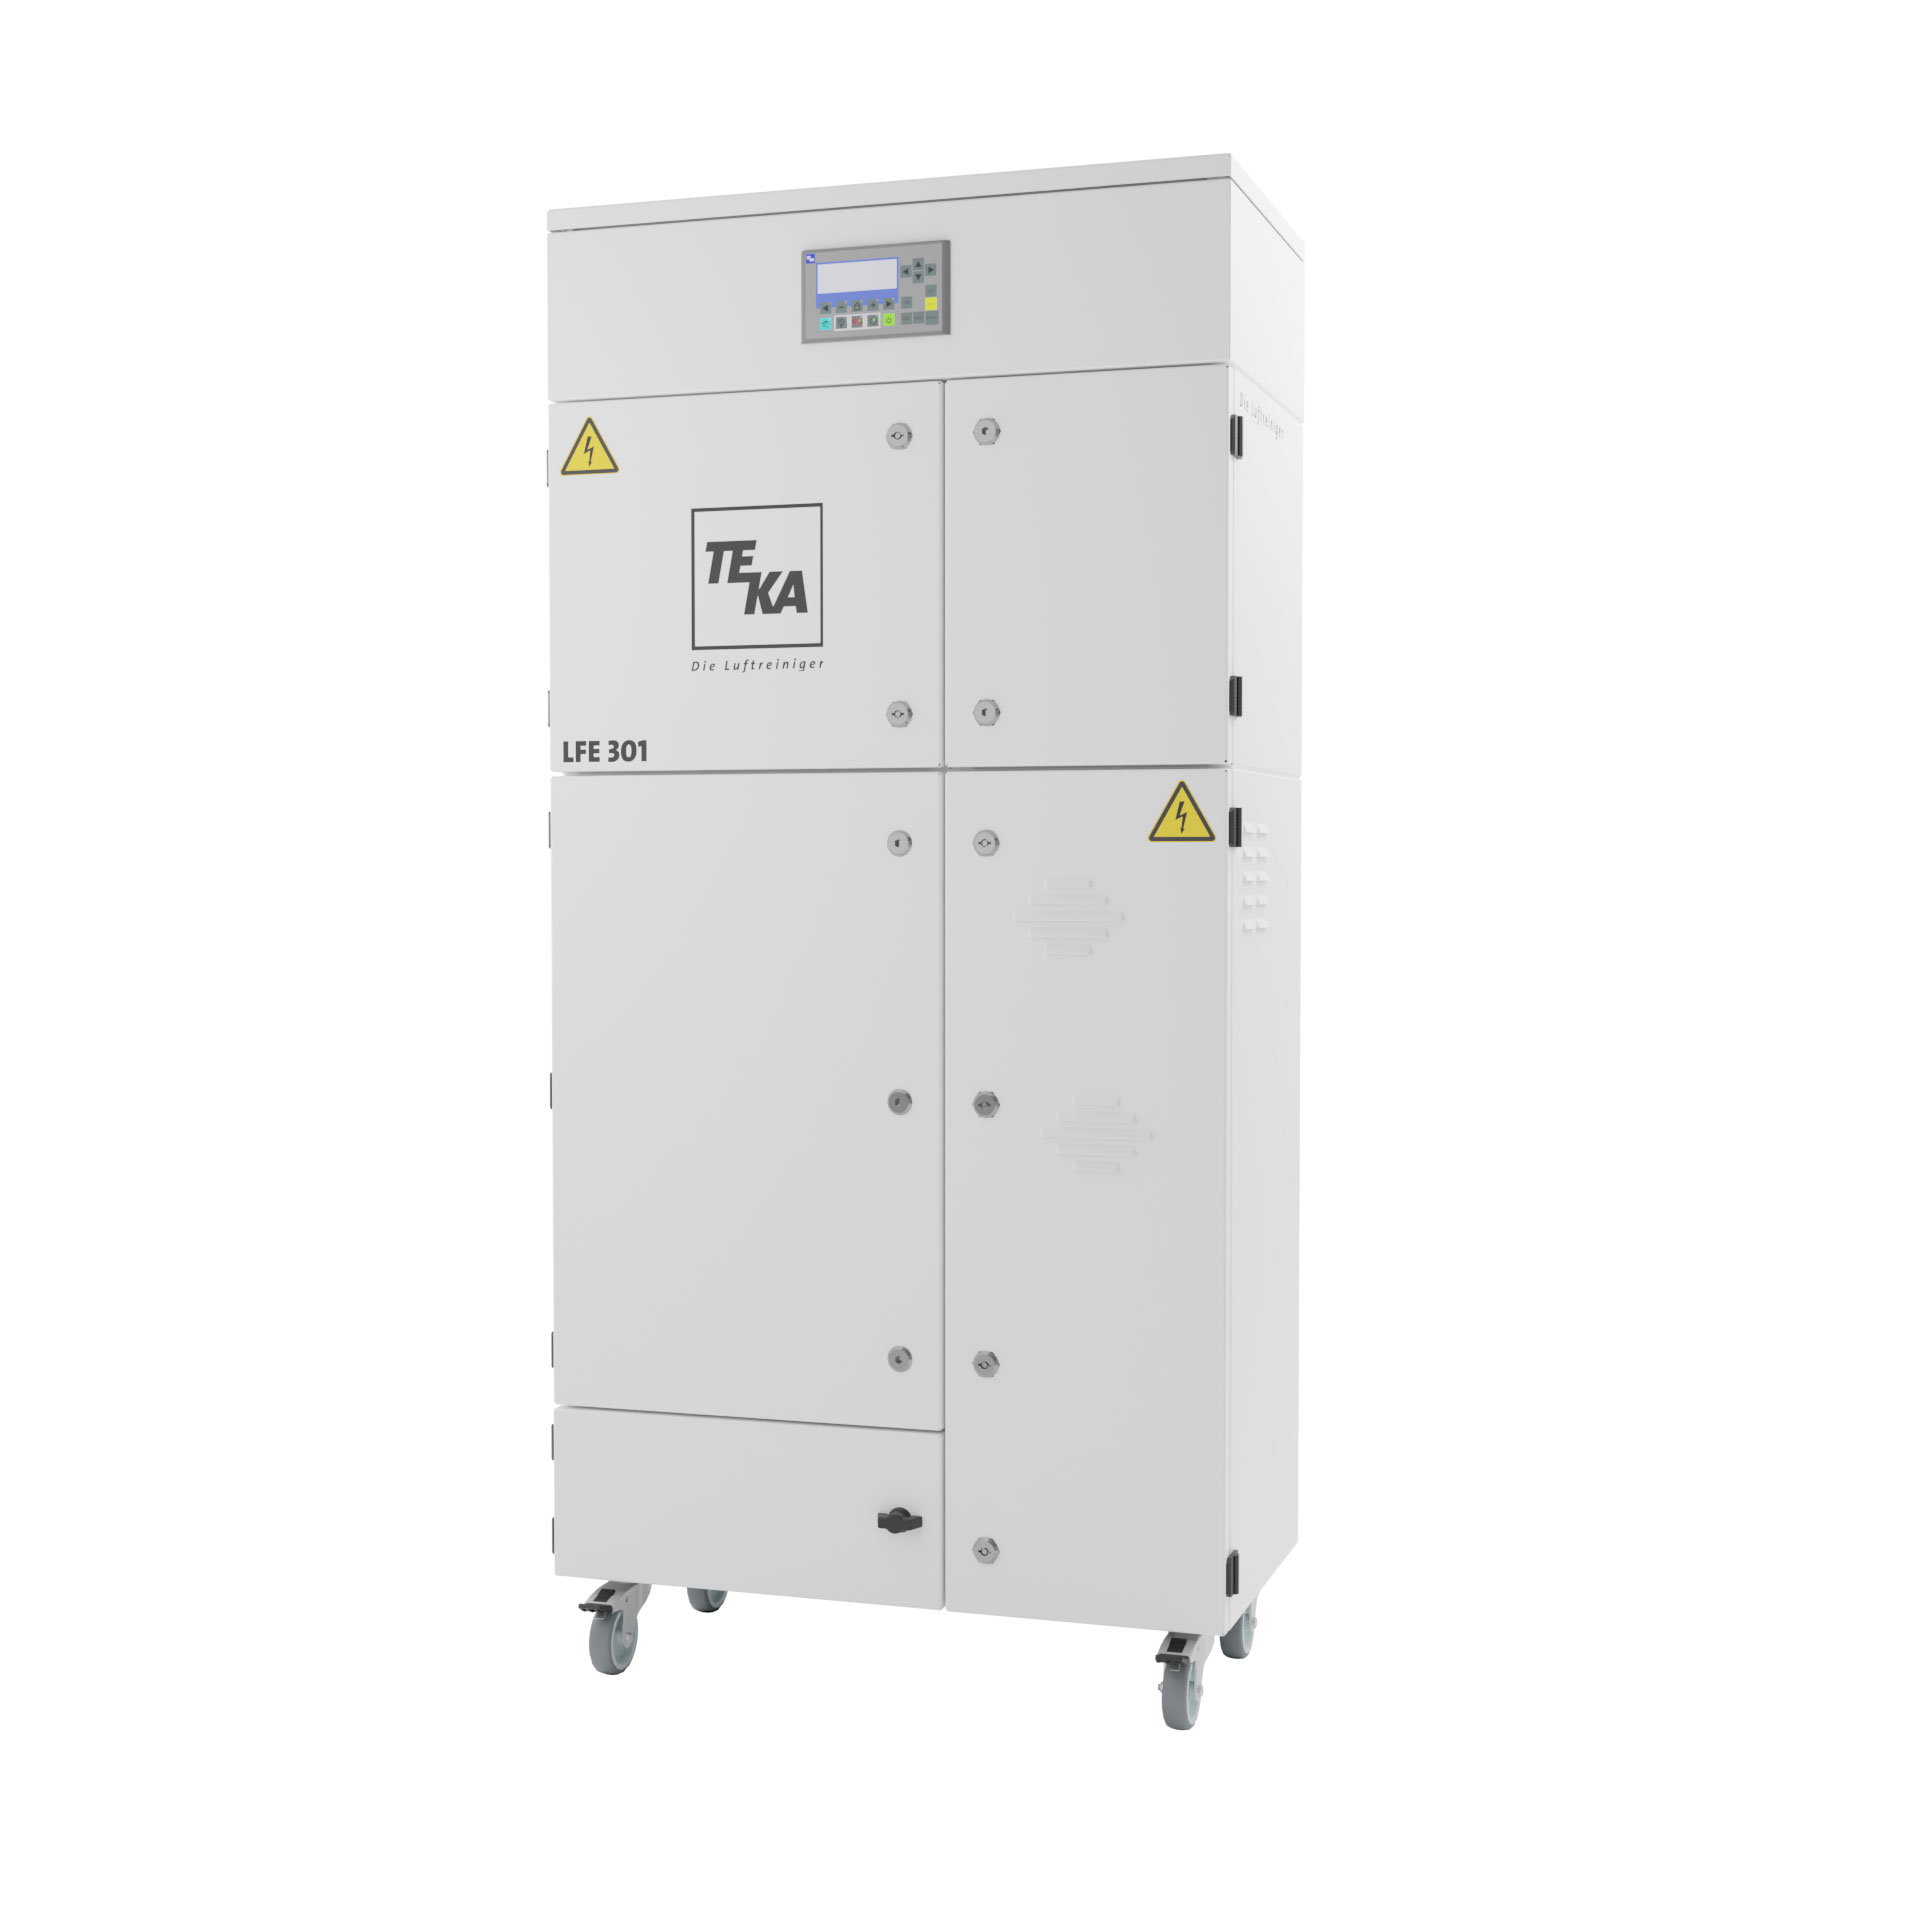 Extraction unit type LFE 301 for ST1 dust MIE>10mJ